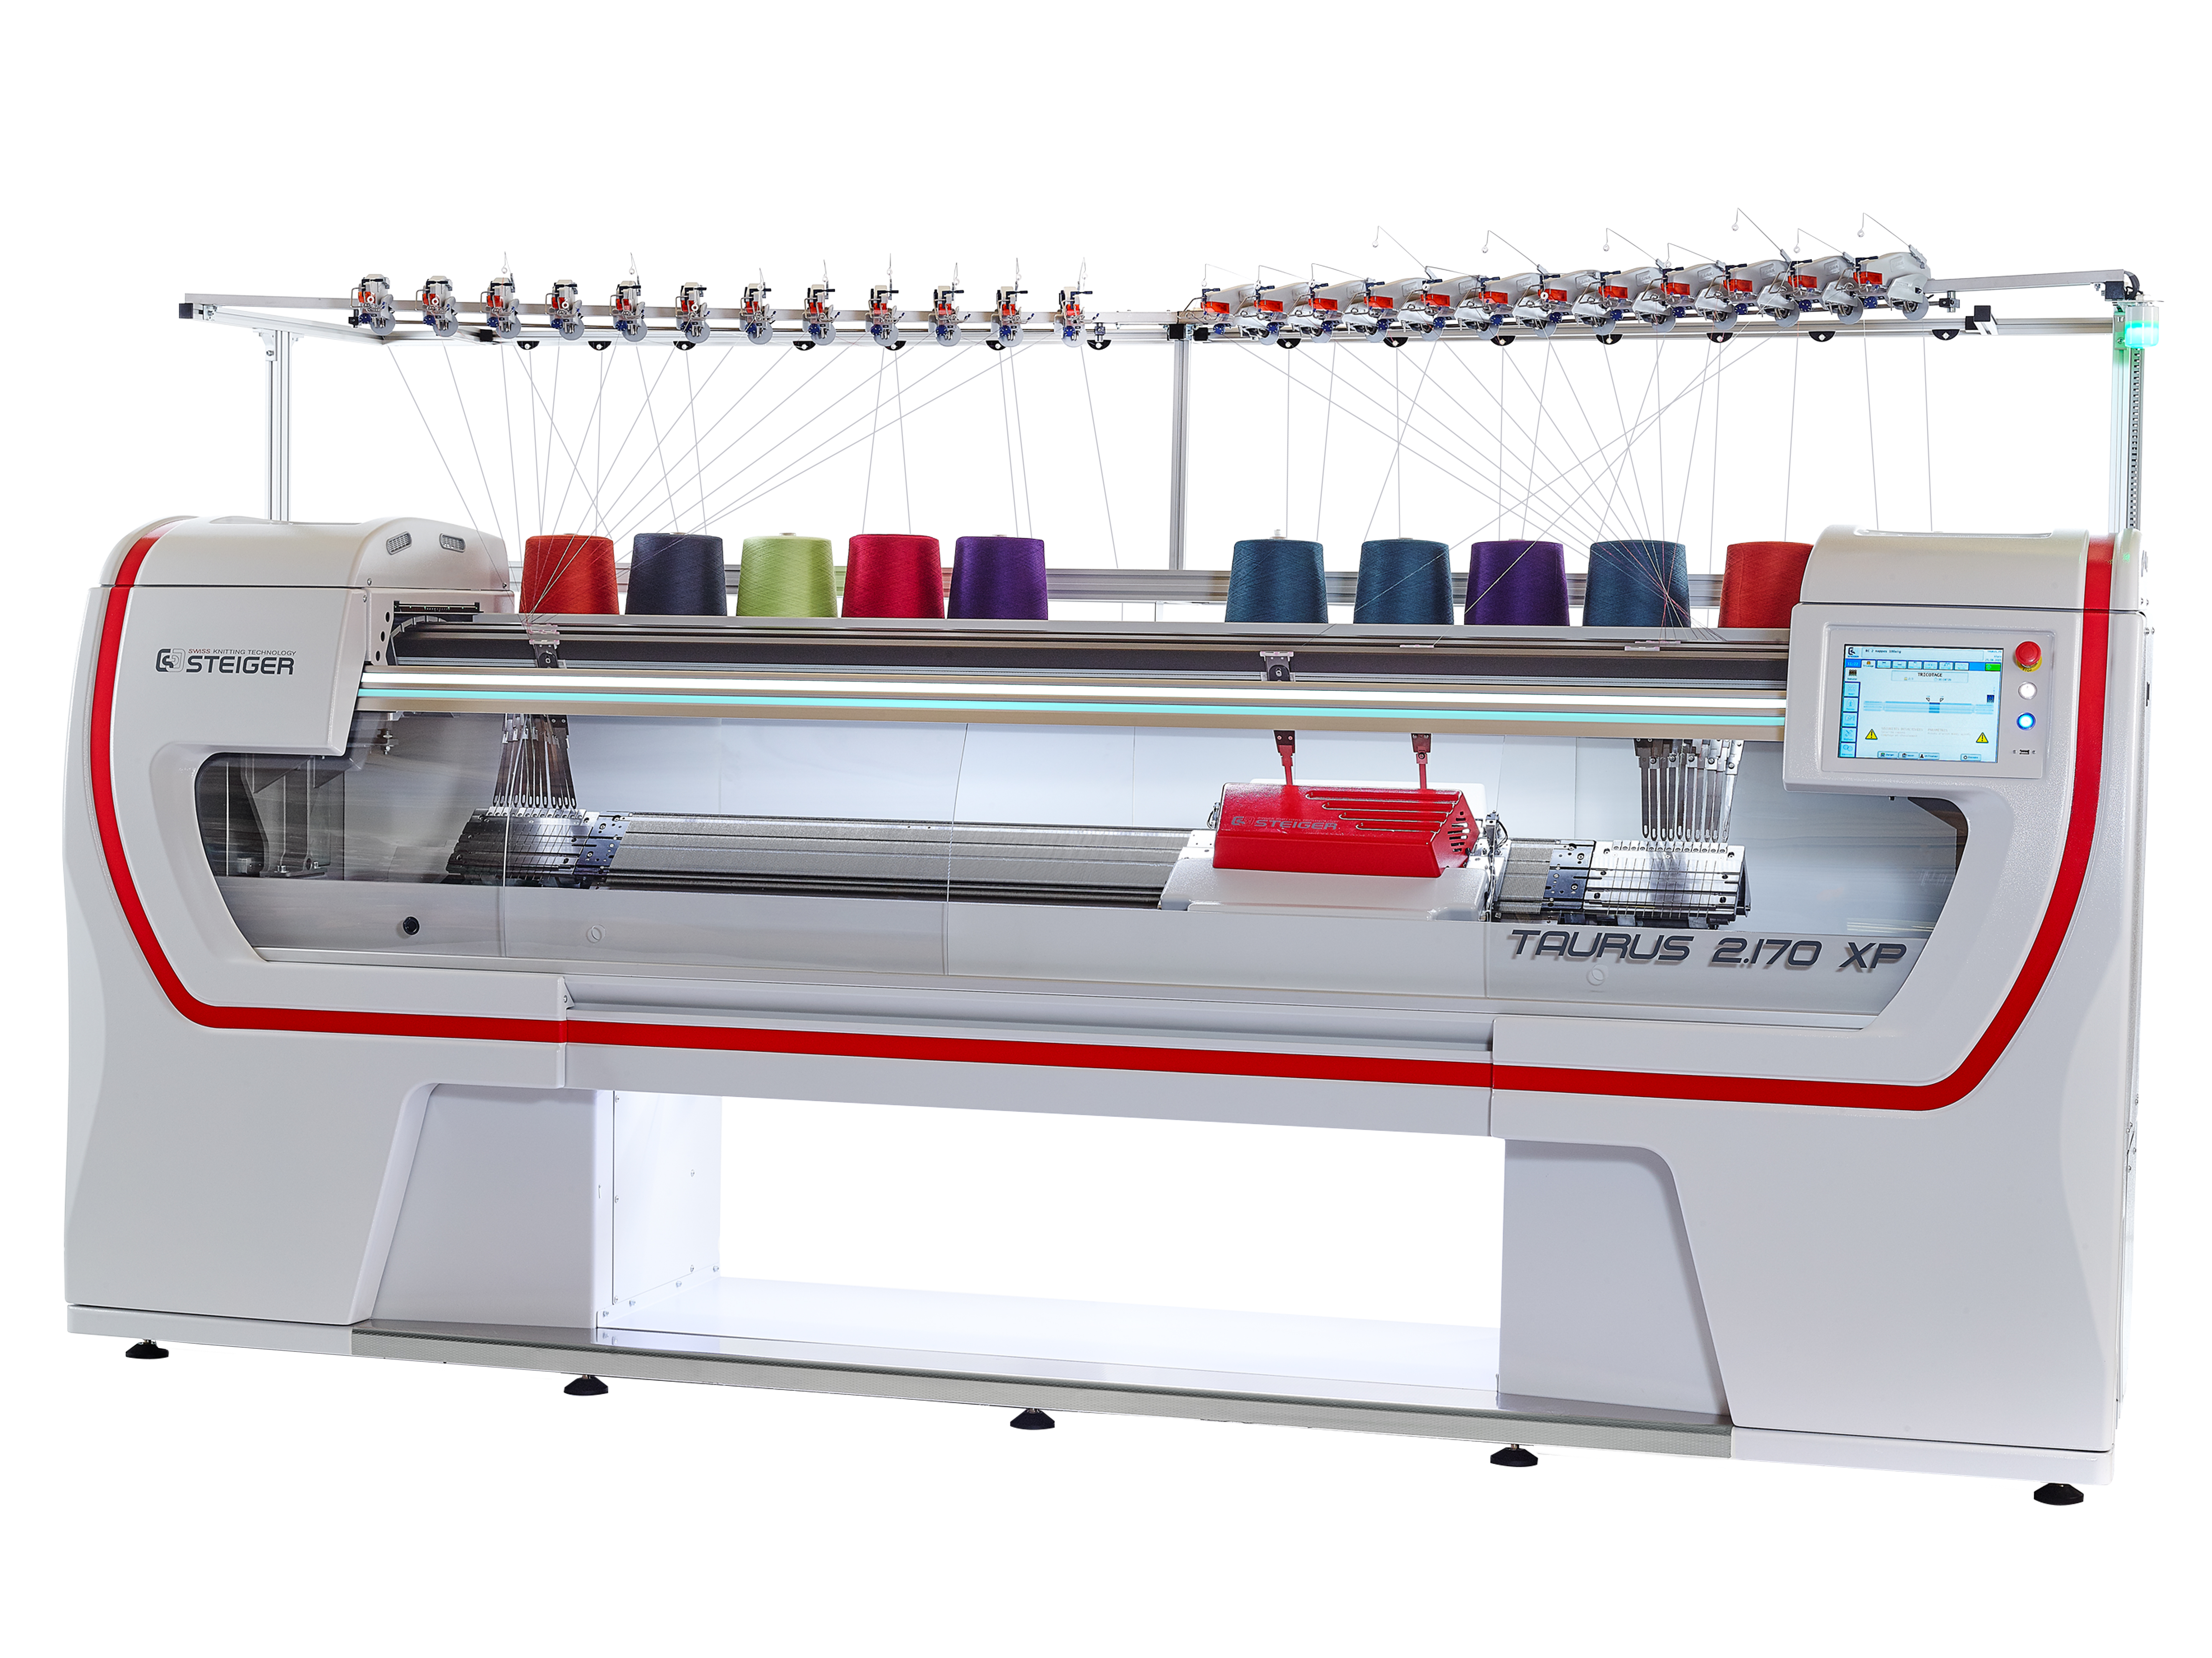 The Taurus 2.170 XP machine contains two innovations patented by Steiger: the compound needle and the storage punch. This unique construction allows complete garment knitting with intarsia, multilayer knitting, and complex weft knitting